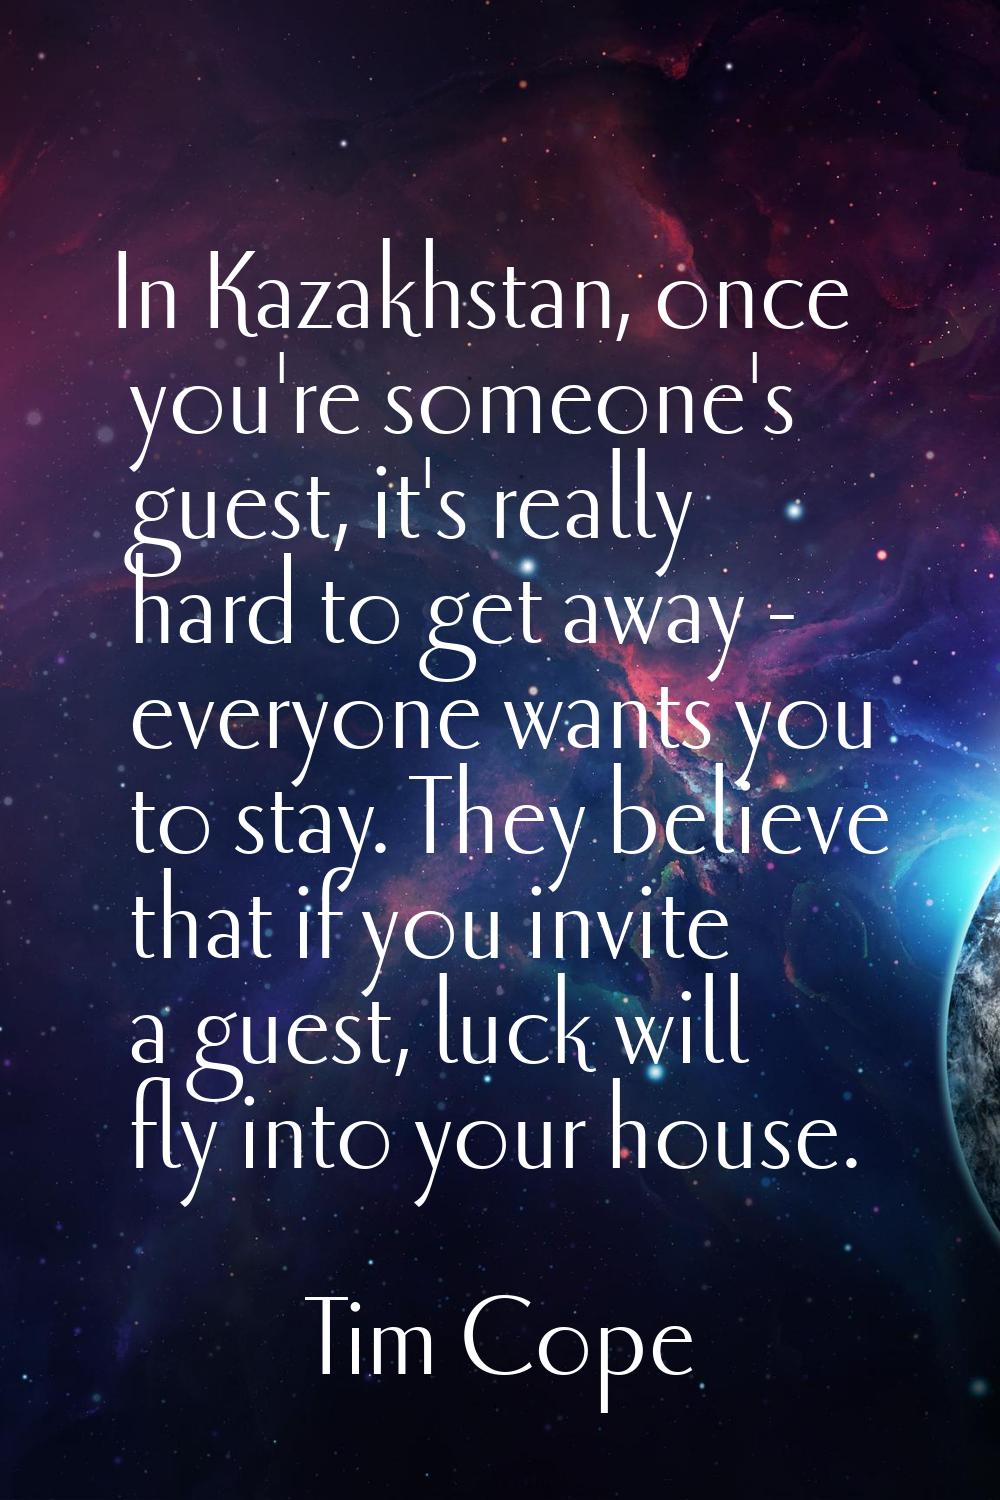 In Kazakhstan, once you're someone's guest, it's really hard to get away - everyone wants you to st